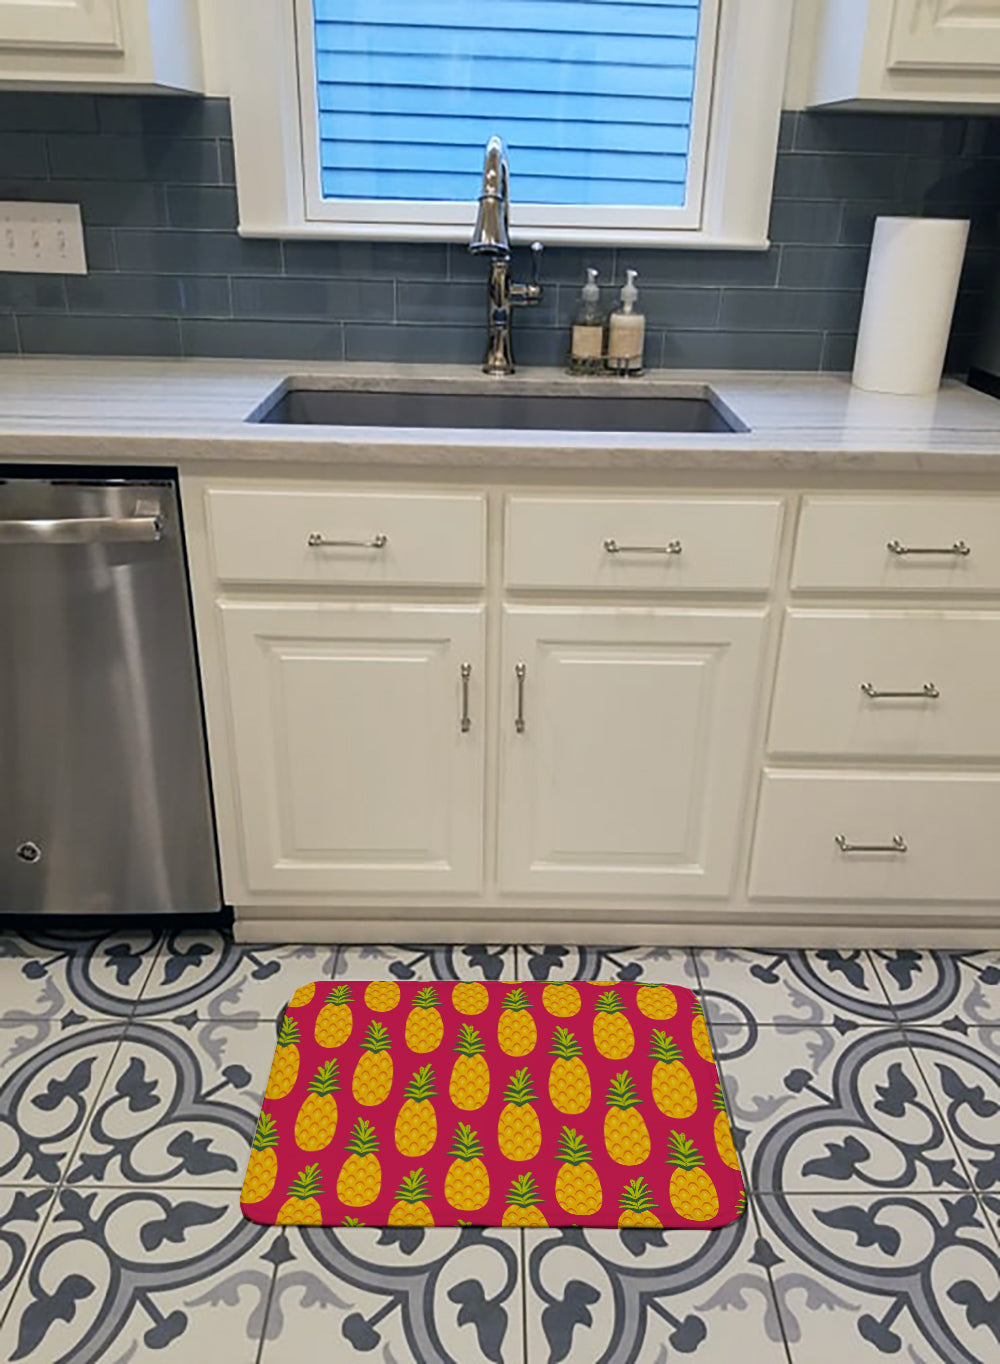 Pineapples on Pink Machine Washable Memory Foam Mat BB5136RUG - the-store.com